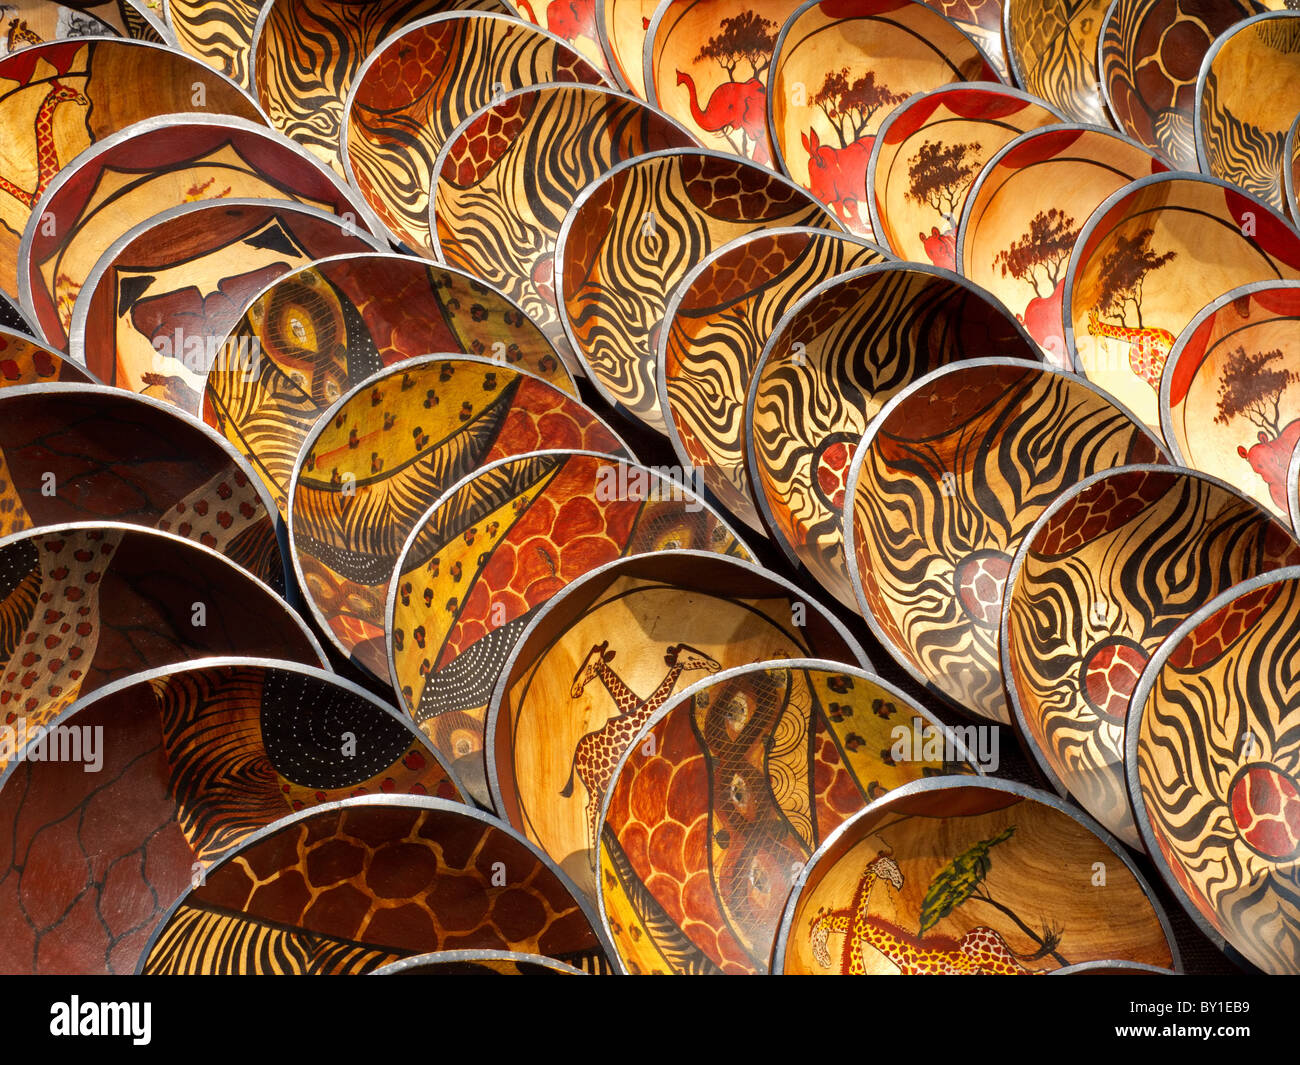 Decorated hand made wooden bowls carved from the wood of indigenous African trees Stock Photo